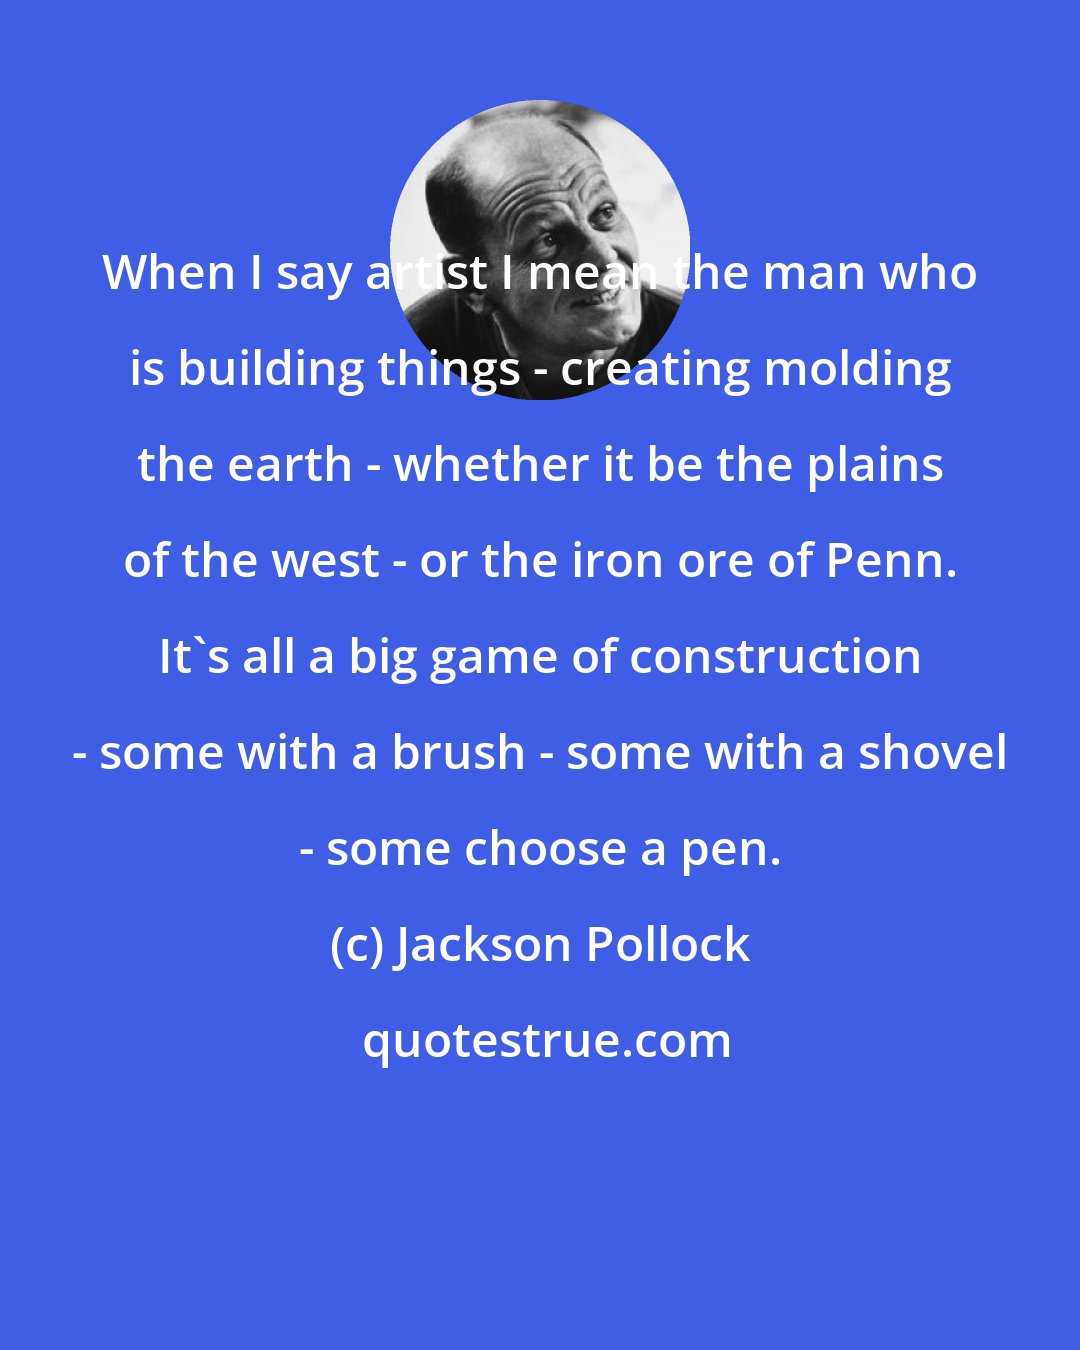 Jackson Pollock: When I say artist I mean the man who is building things - creating molding the earth - whether it be the plains of the west - or the iron ore of Penn. It's all a big game of construction - some with a brush - some with a shovel - some choose a pen.